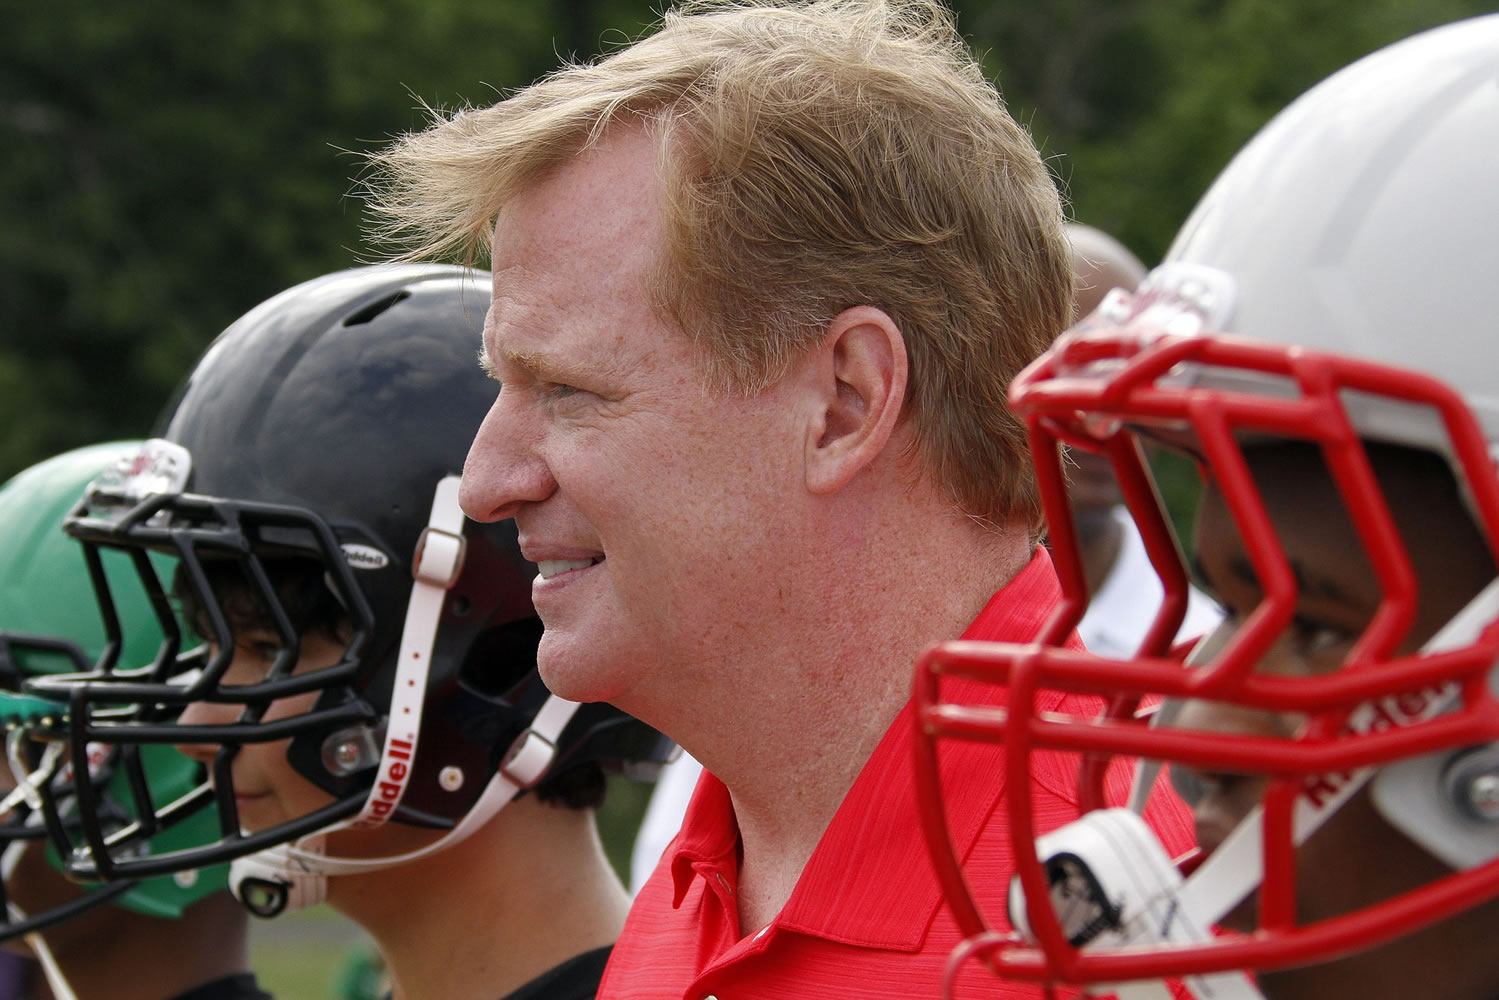 NFL commissioner Roger Goodell, center, poses youth football players from the Akron Parents Pee Wee Football League after they received new helmets in Akron, Ohio.